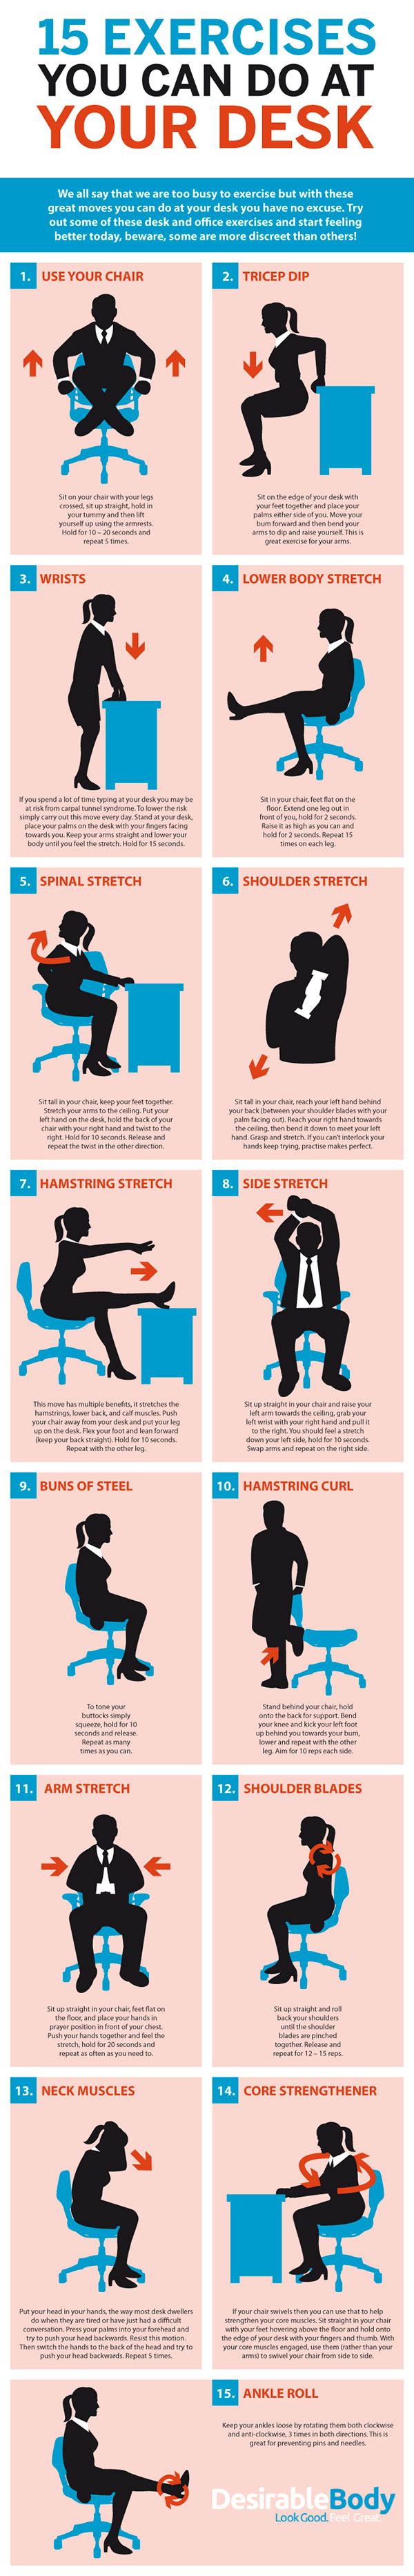 Deskercise! 15 Simple Exercises You Can Do At Your Desk